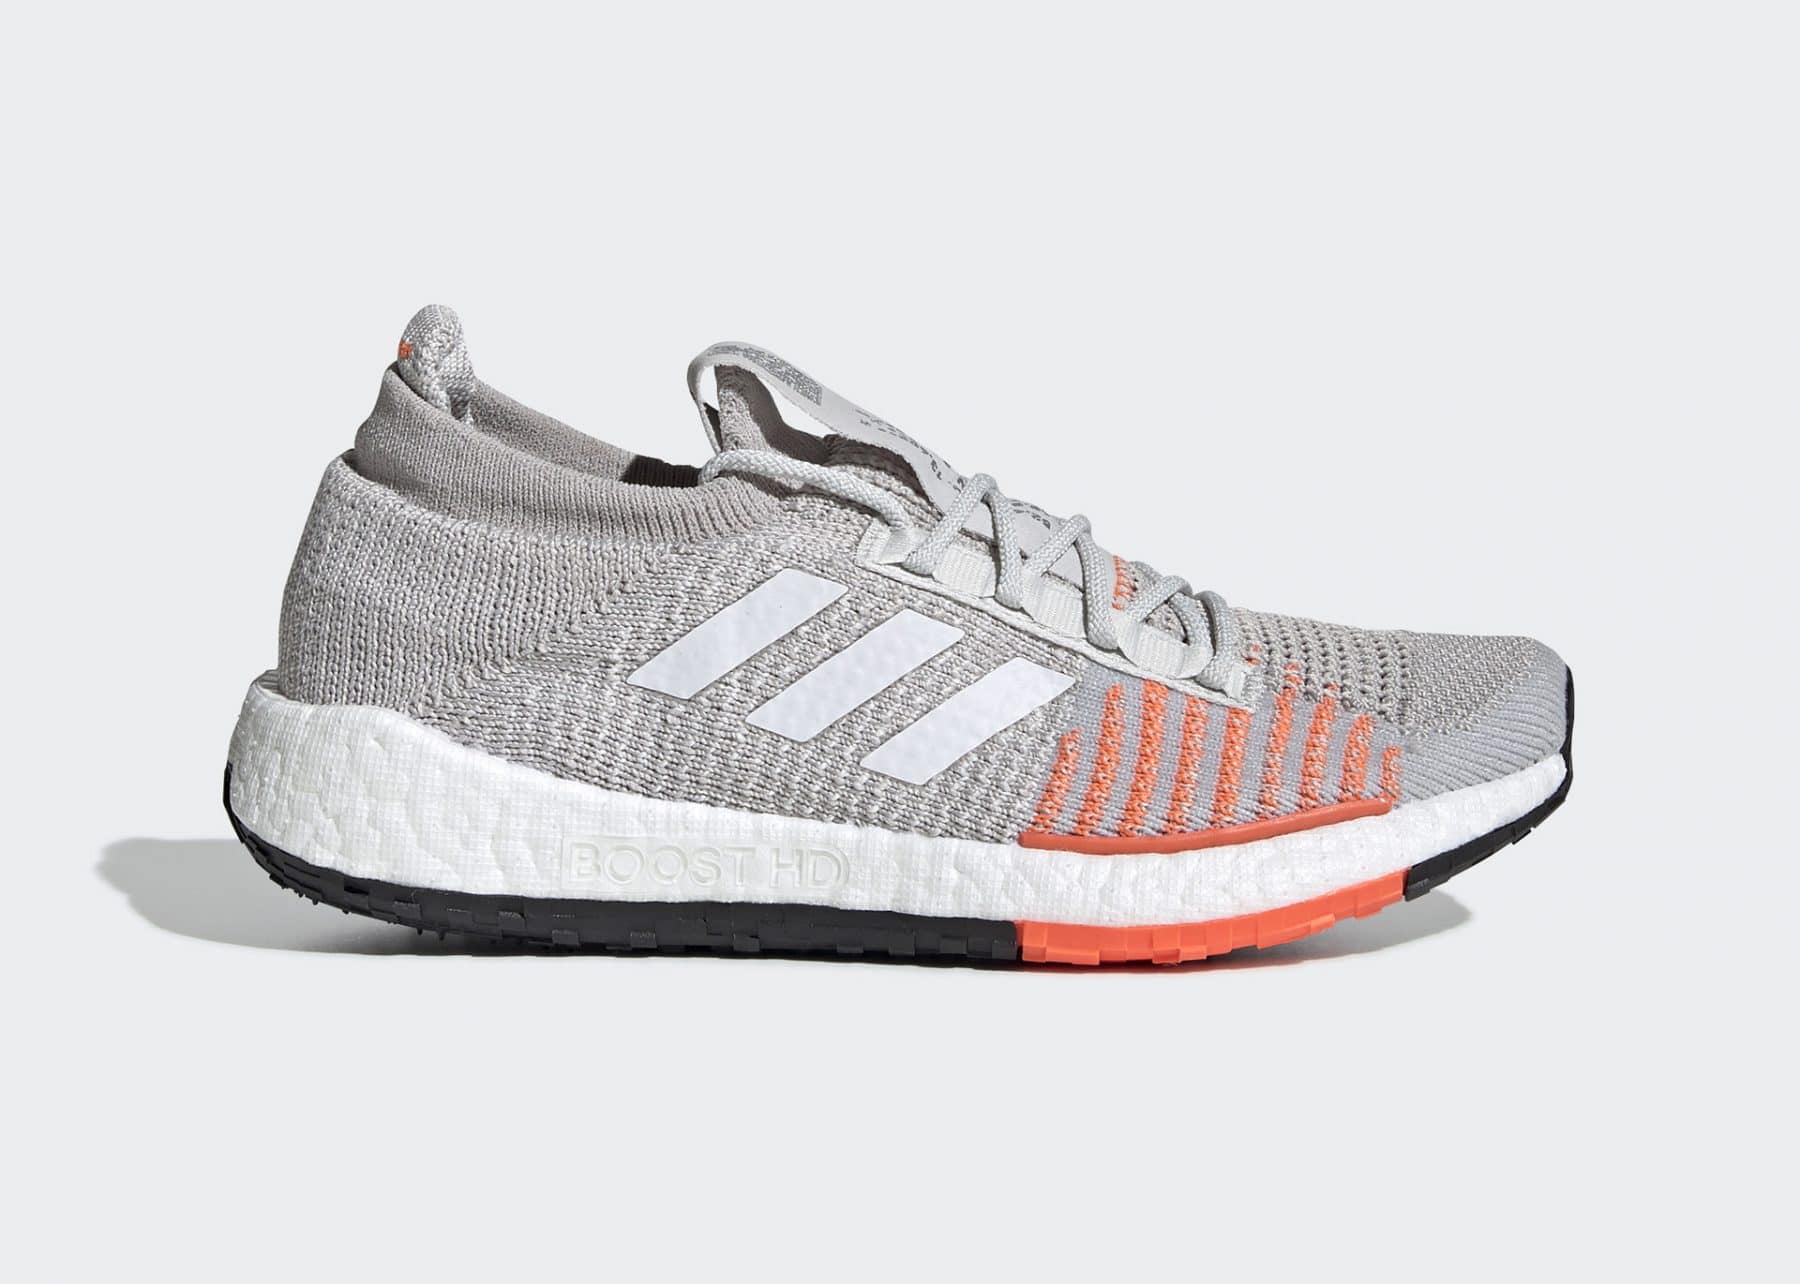 Beloved Not essential Wreck Adidas PulseBoost HD: Boost with Stability? - WearTesters